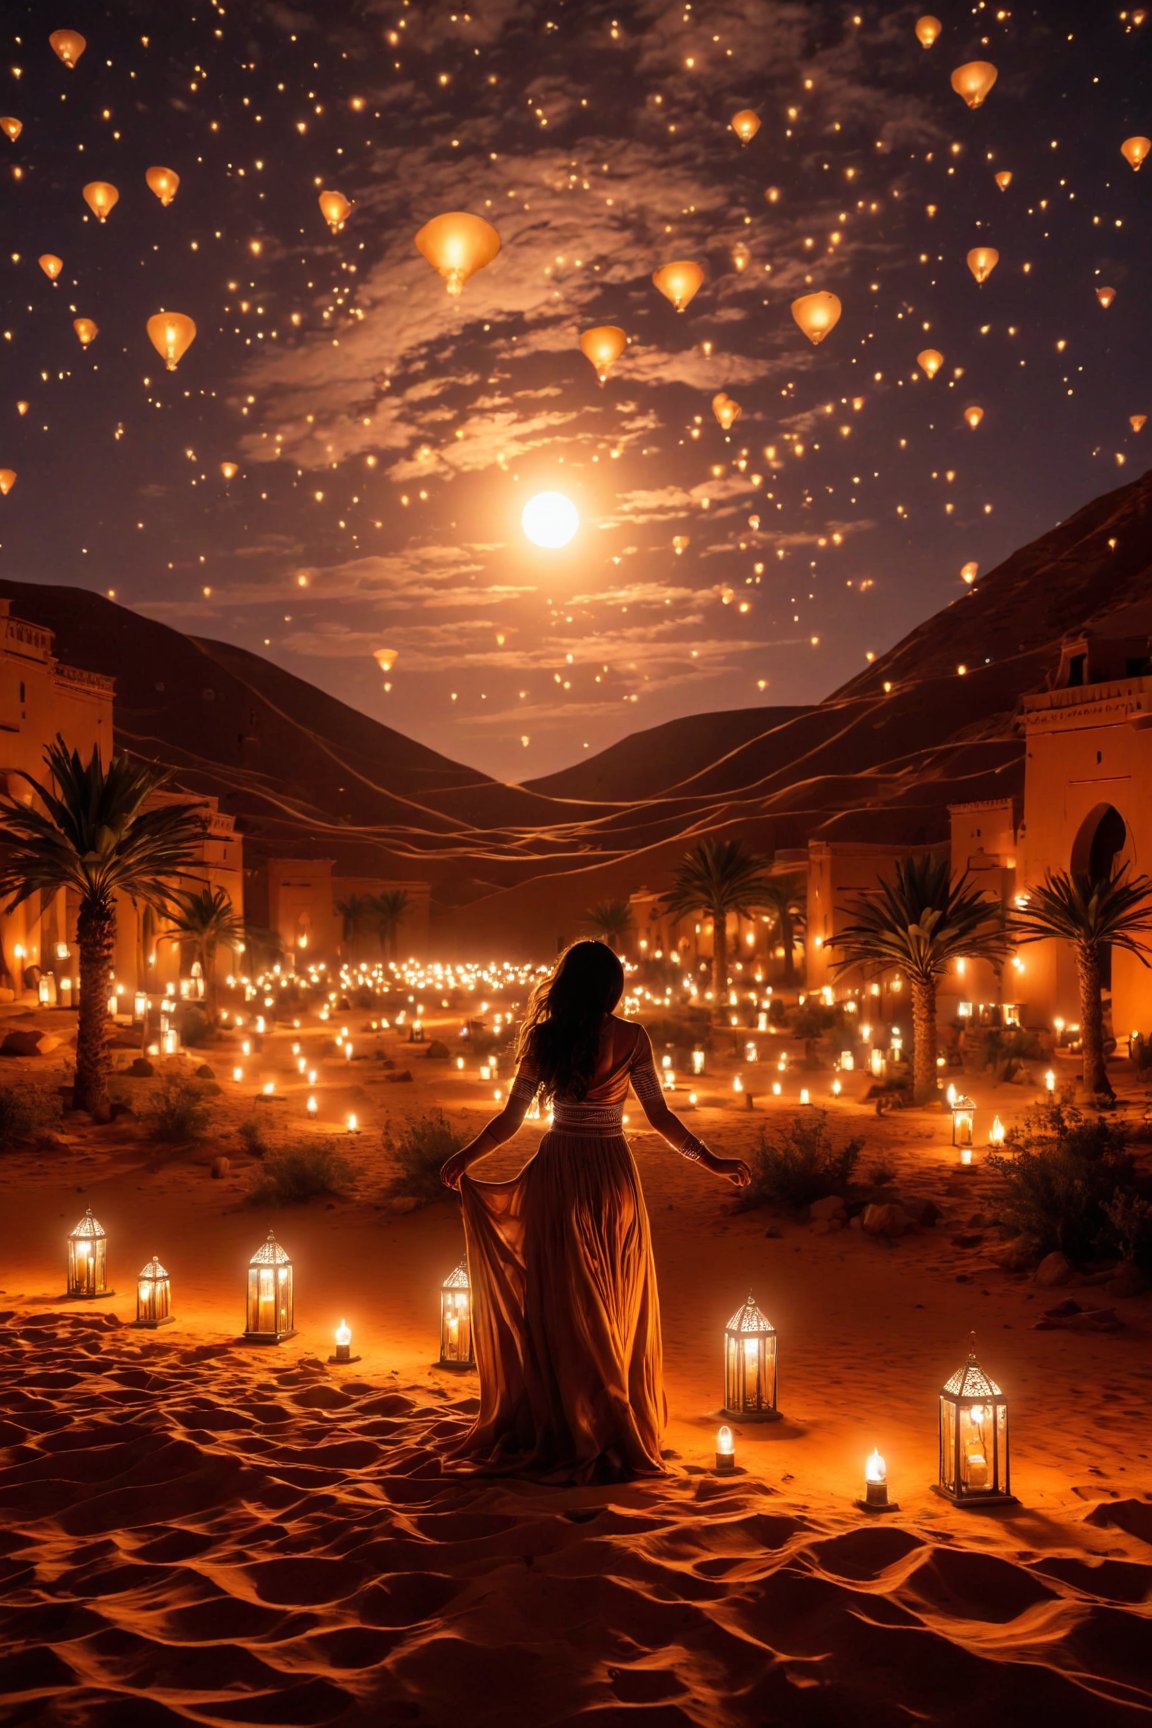 Dancing under the enchanting glow of the Sahara desert night. 🌌✨ A mesmerizing display of grace and mystique in the midst of a radiant garden. 🌙✨ #MagicInTheDesert 🌟✨